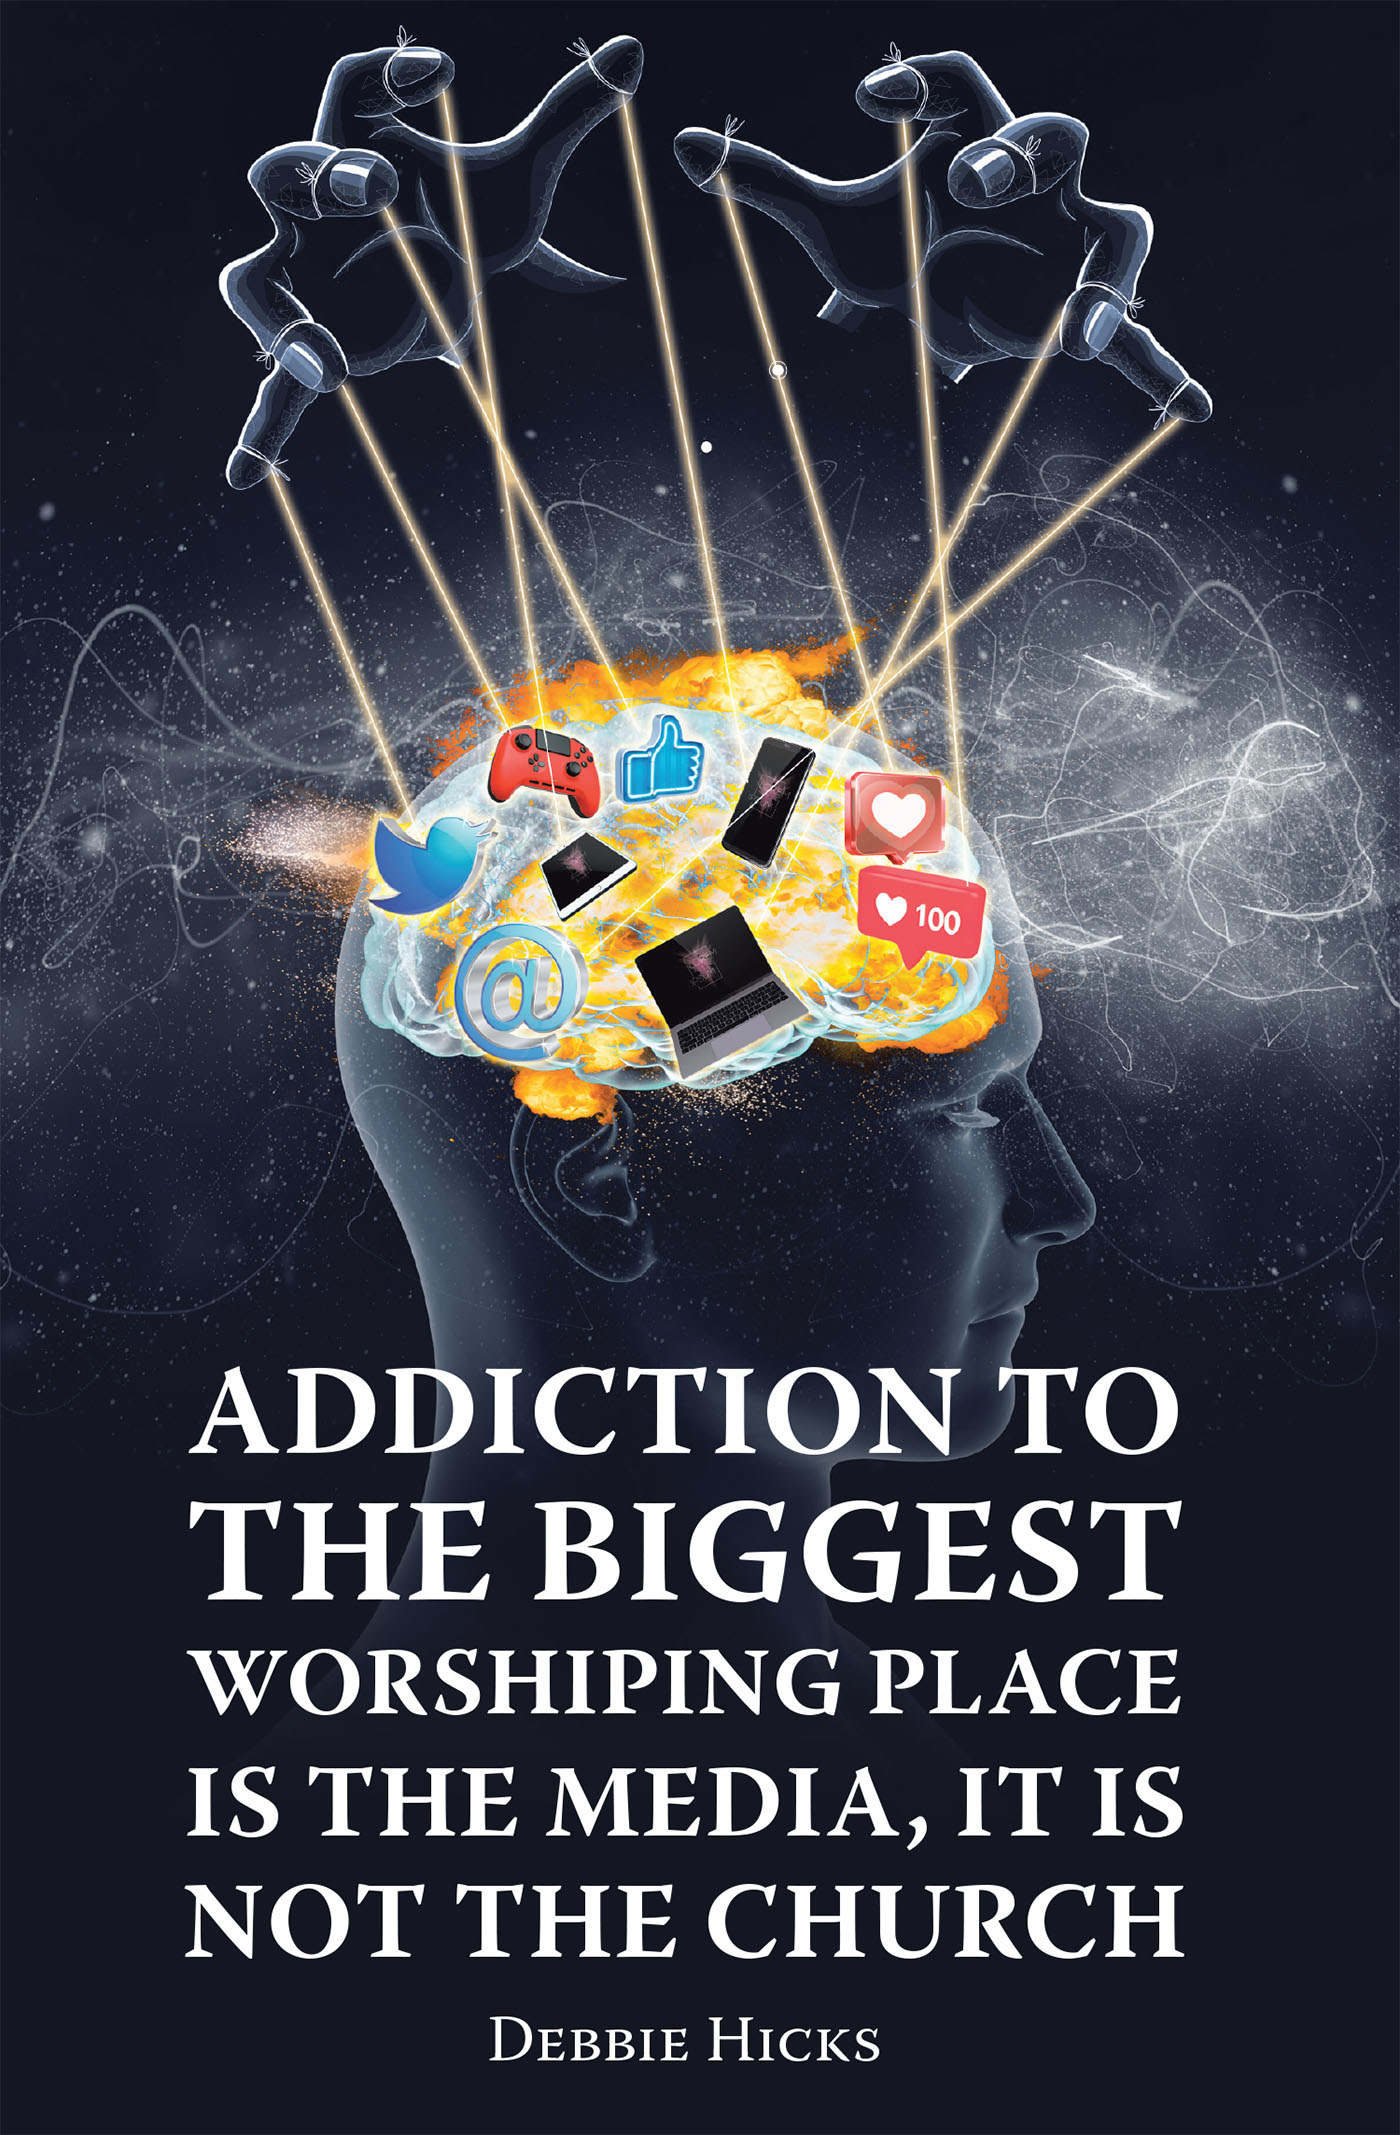 Debbie Hicks’s Newly Released “Addiction To The Biggest Worshiping Place Is The Media, It Is Not the Church” is a Fascinating Discussion on Addiction